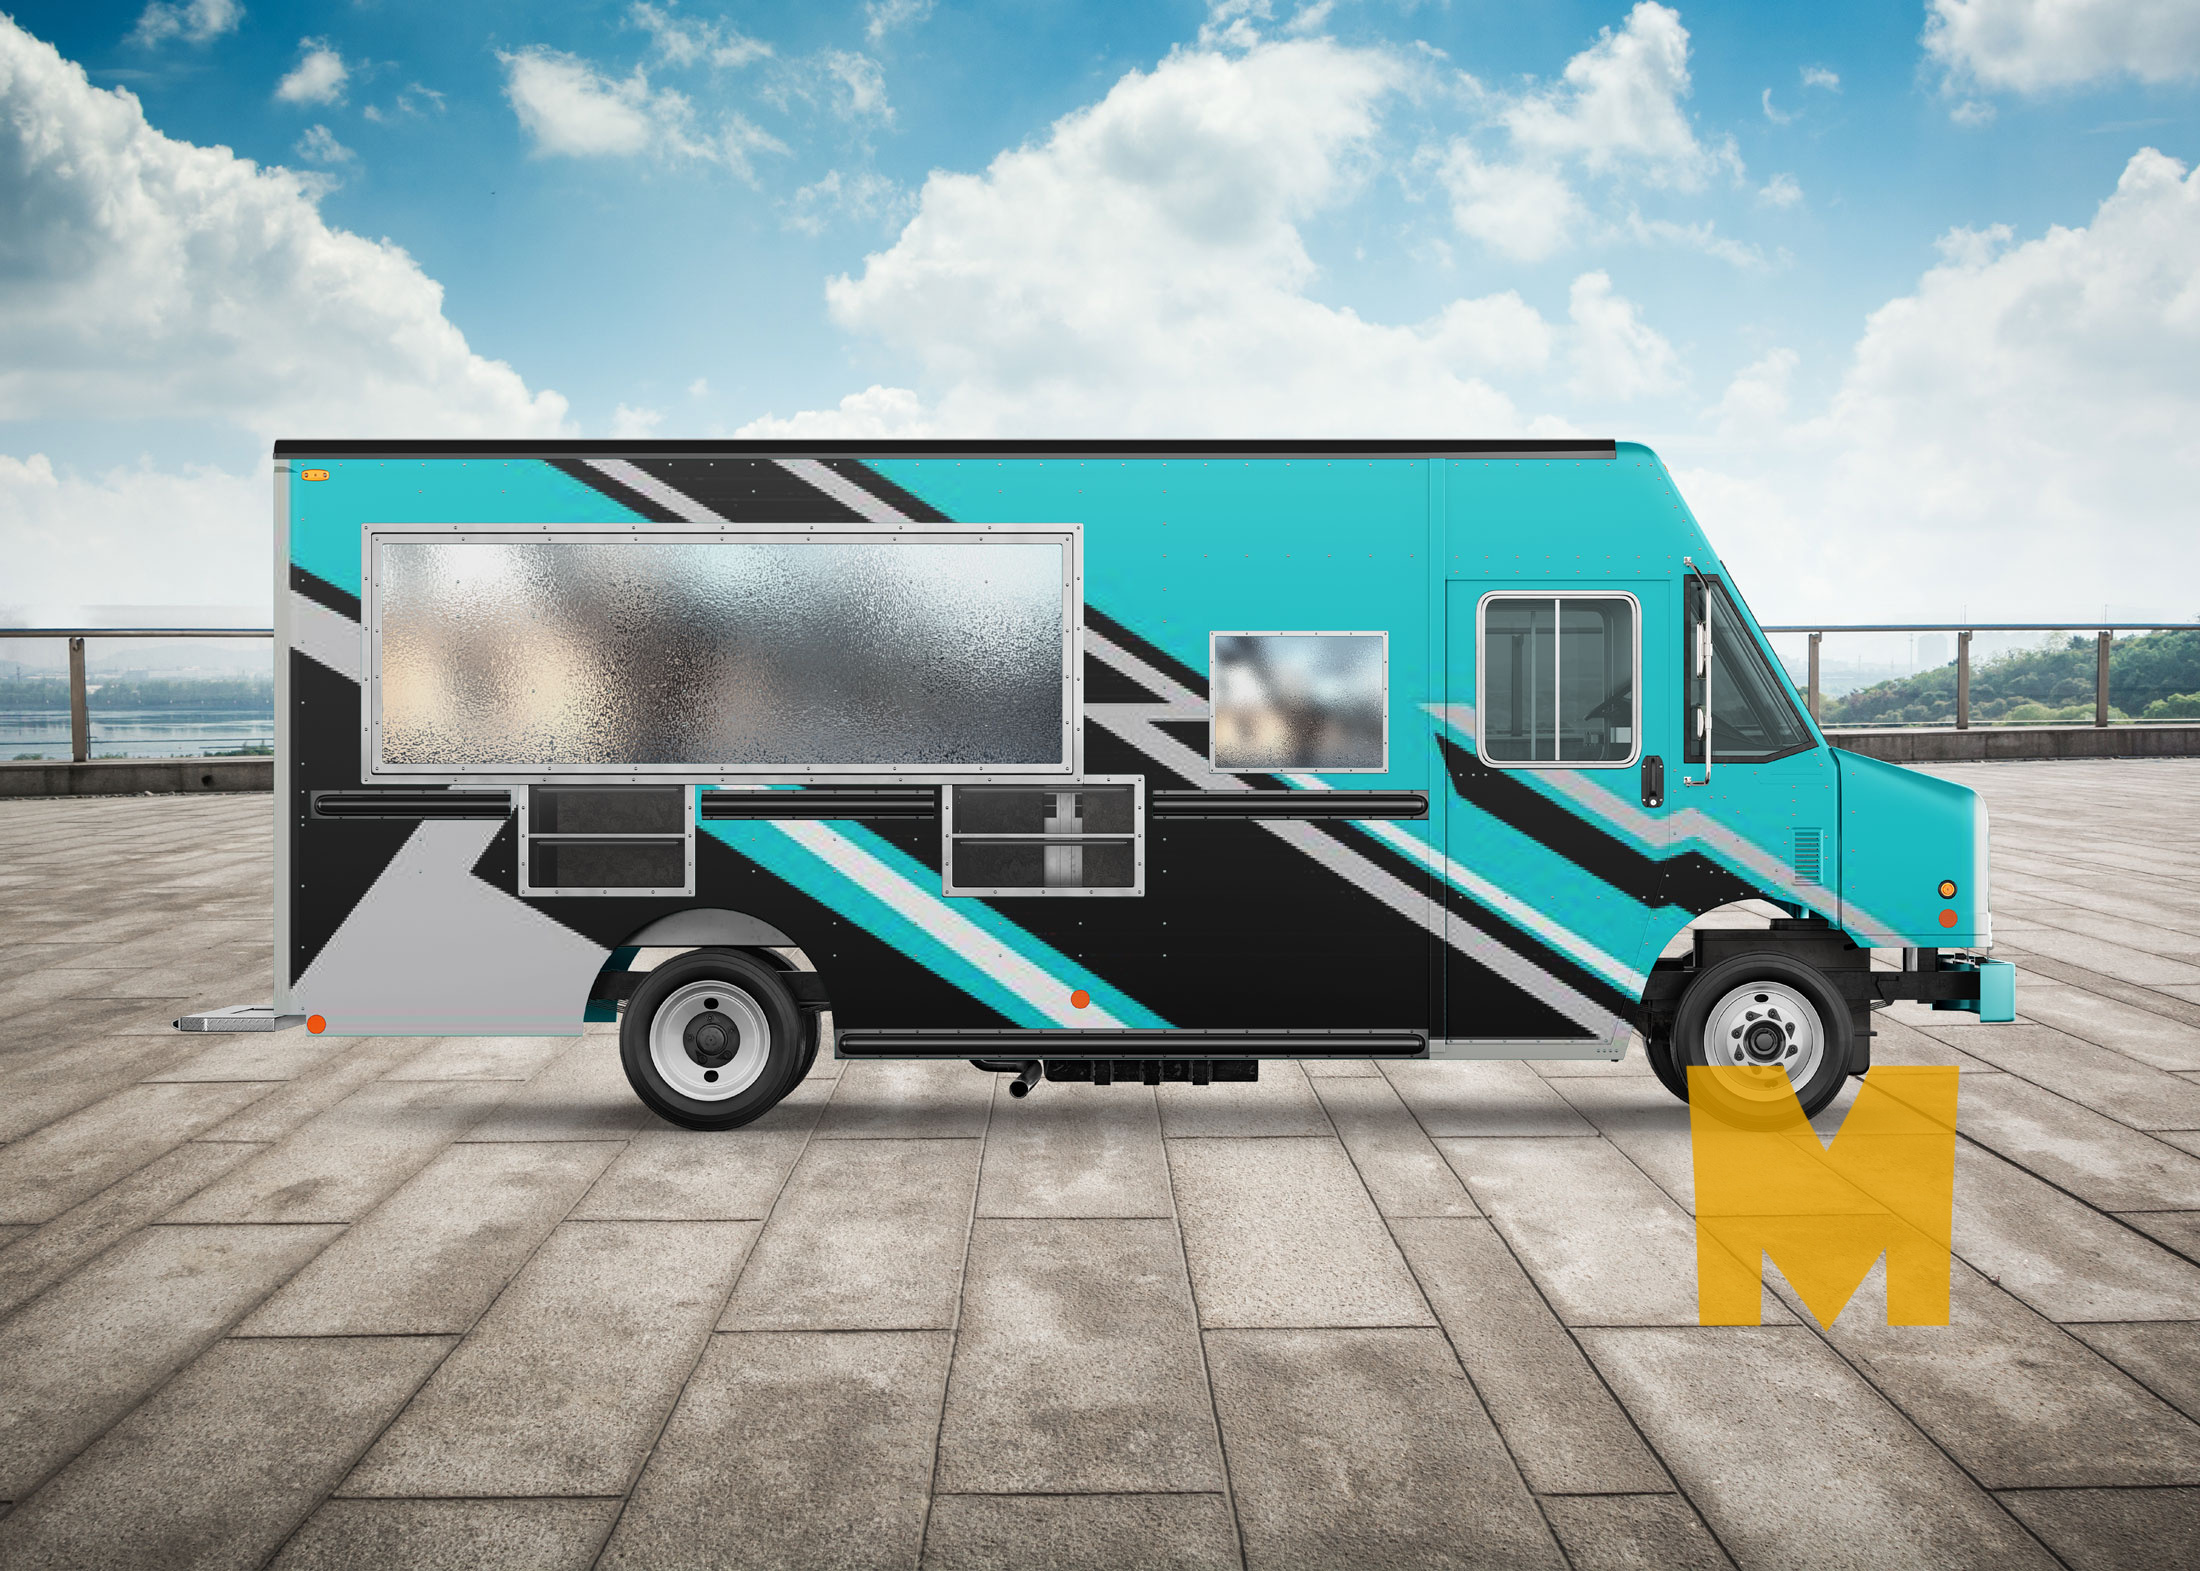 delivery truck mockup